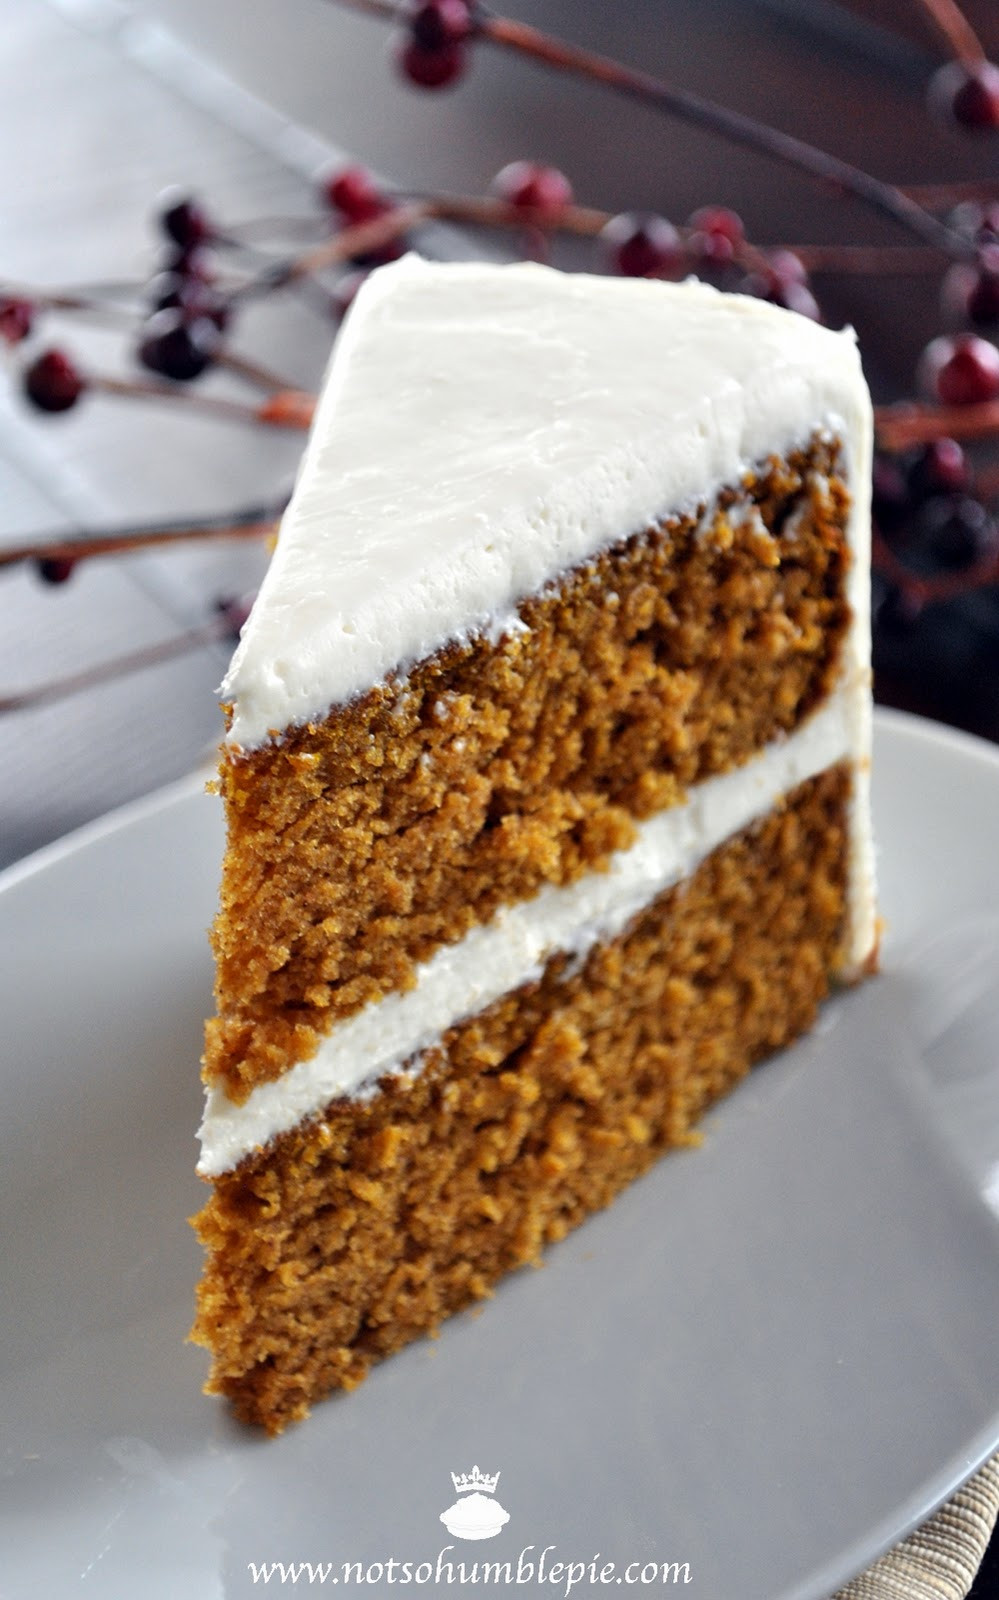 Spice Cake Recipes
 Not So Humble Pie Pumpkin Spice Cake with Whipped Cream